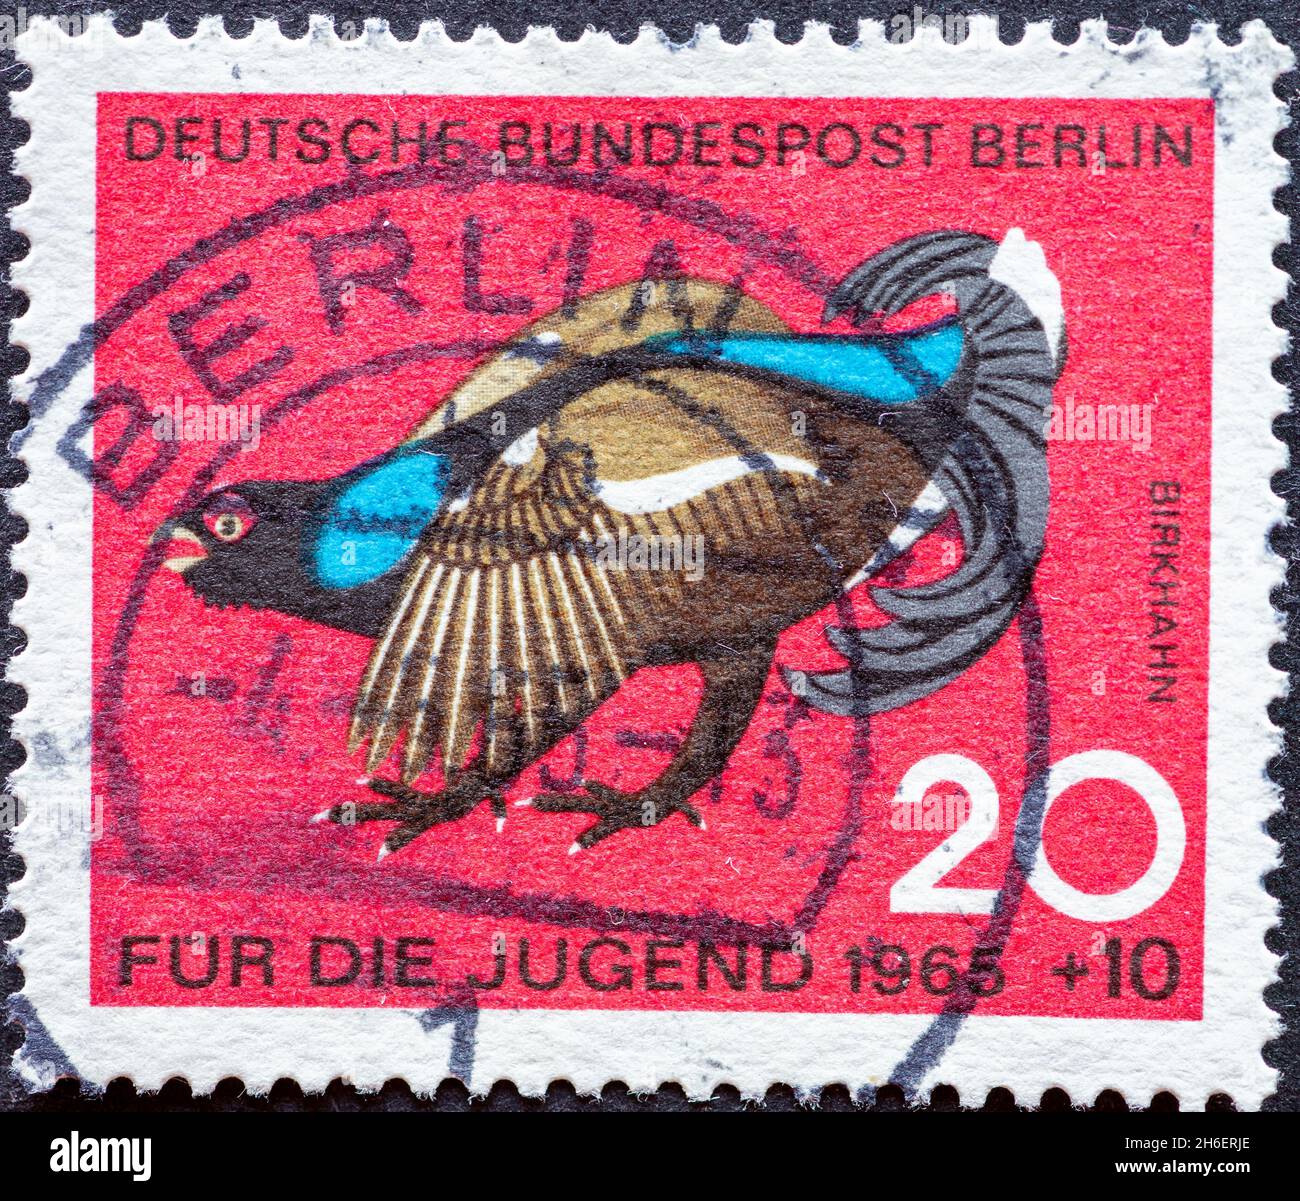 GERMANY, Berlin - CIRCA 1965: a postage stamp from Germany, Berlin showing special wildlife birds: blackcock charity postal stamp for youngsters Stock Photo